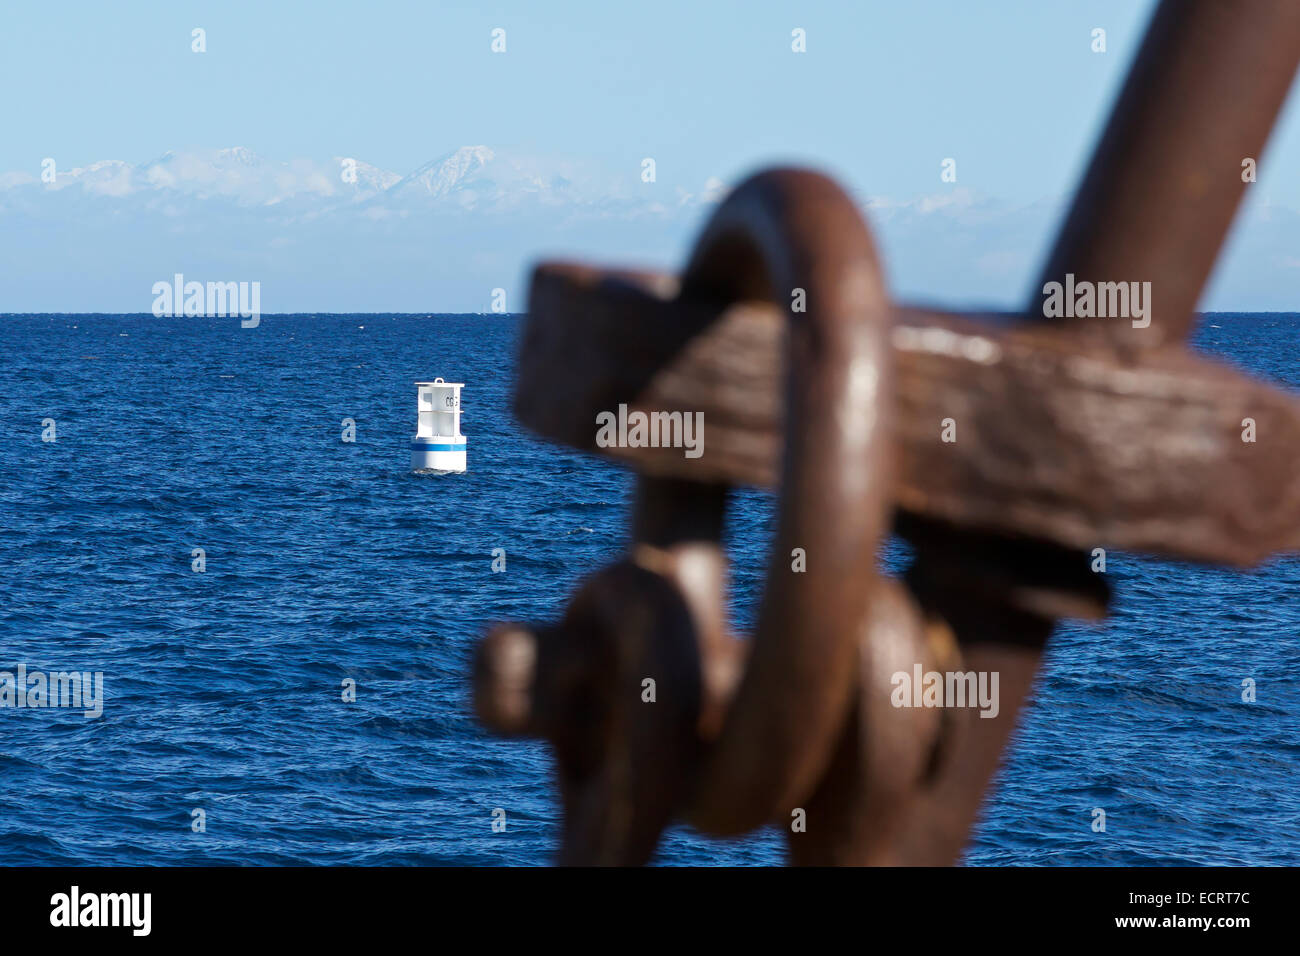 Fresh Snow On The San Gabriel Mountains Viewed From Avalon, Catalina Island, California. A Rusting Ships Anchor Blurred In The Foreground. Stock Photo